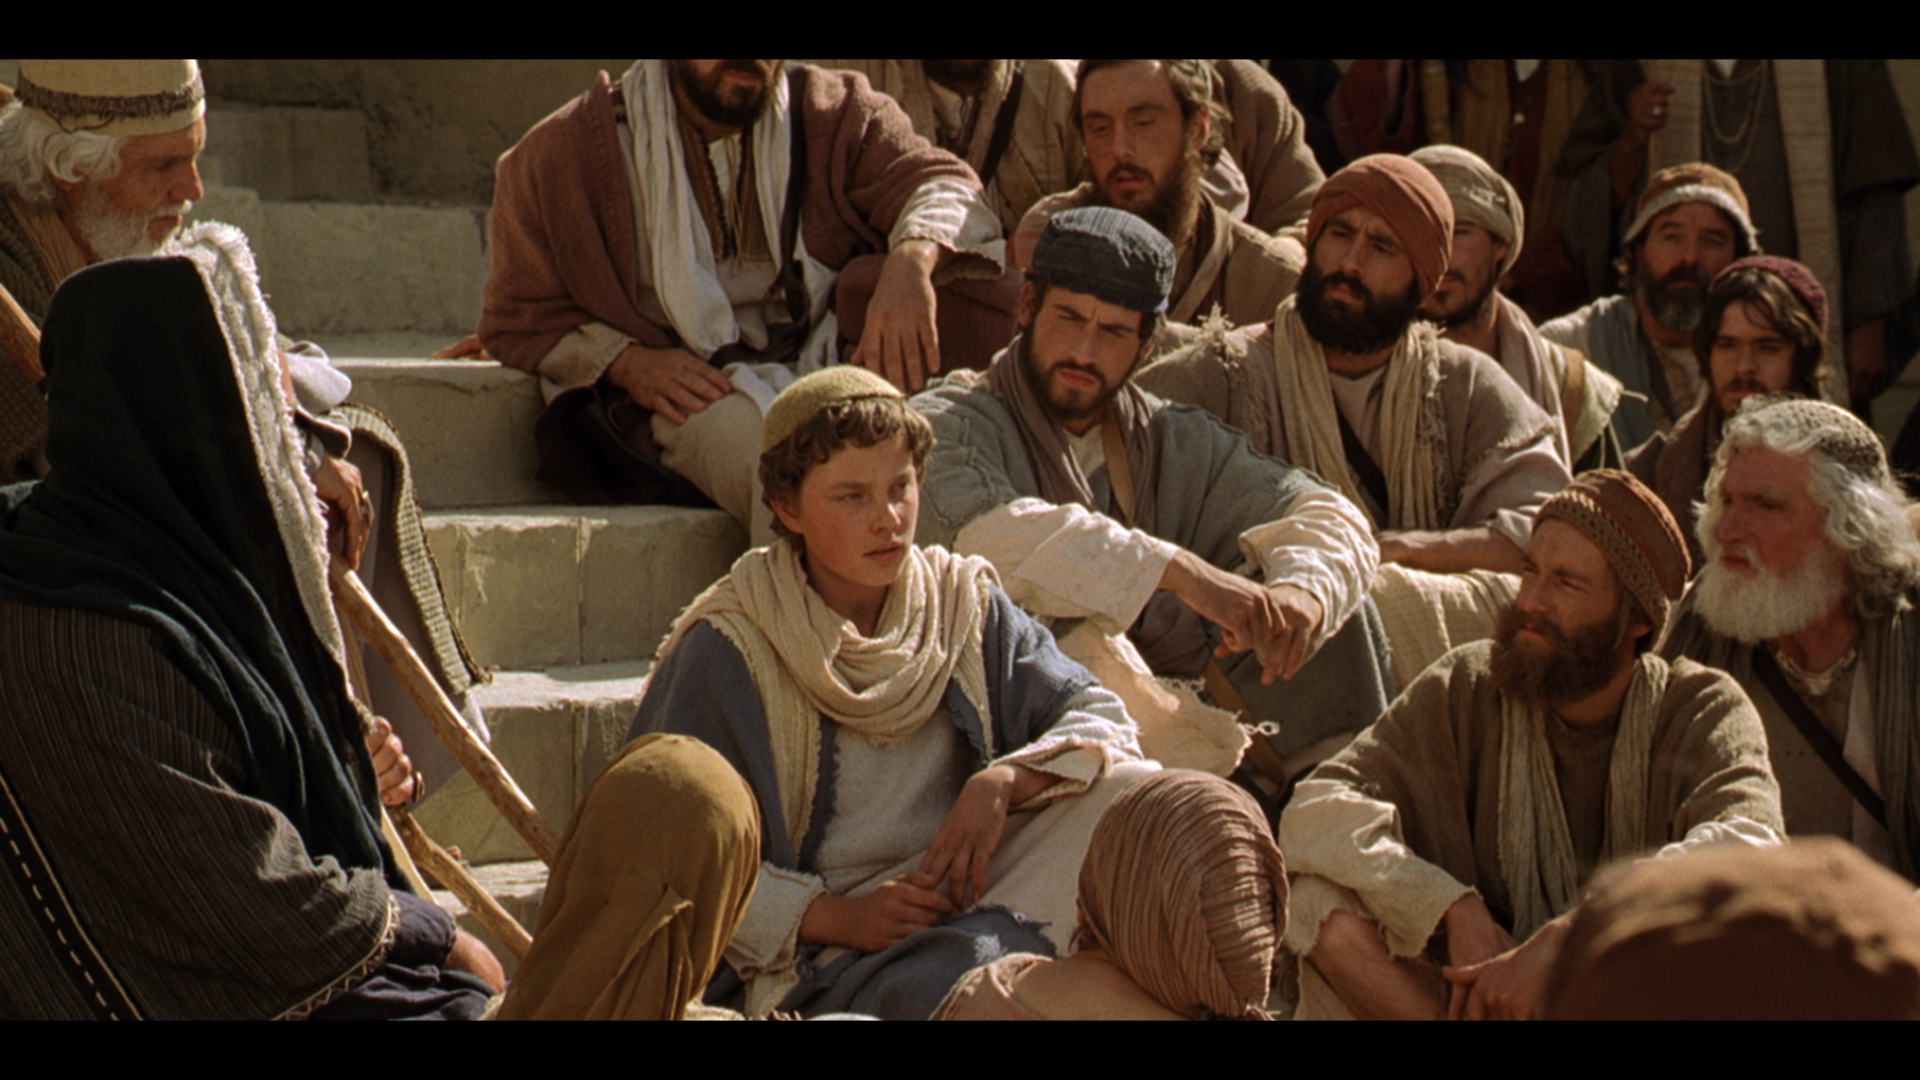 Young Jesus teaching in the temple